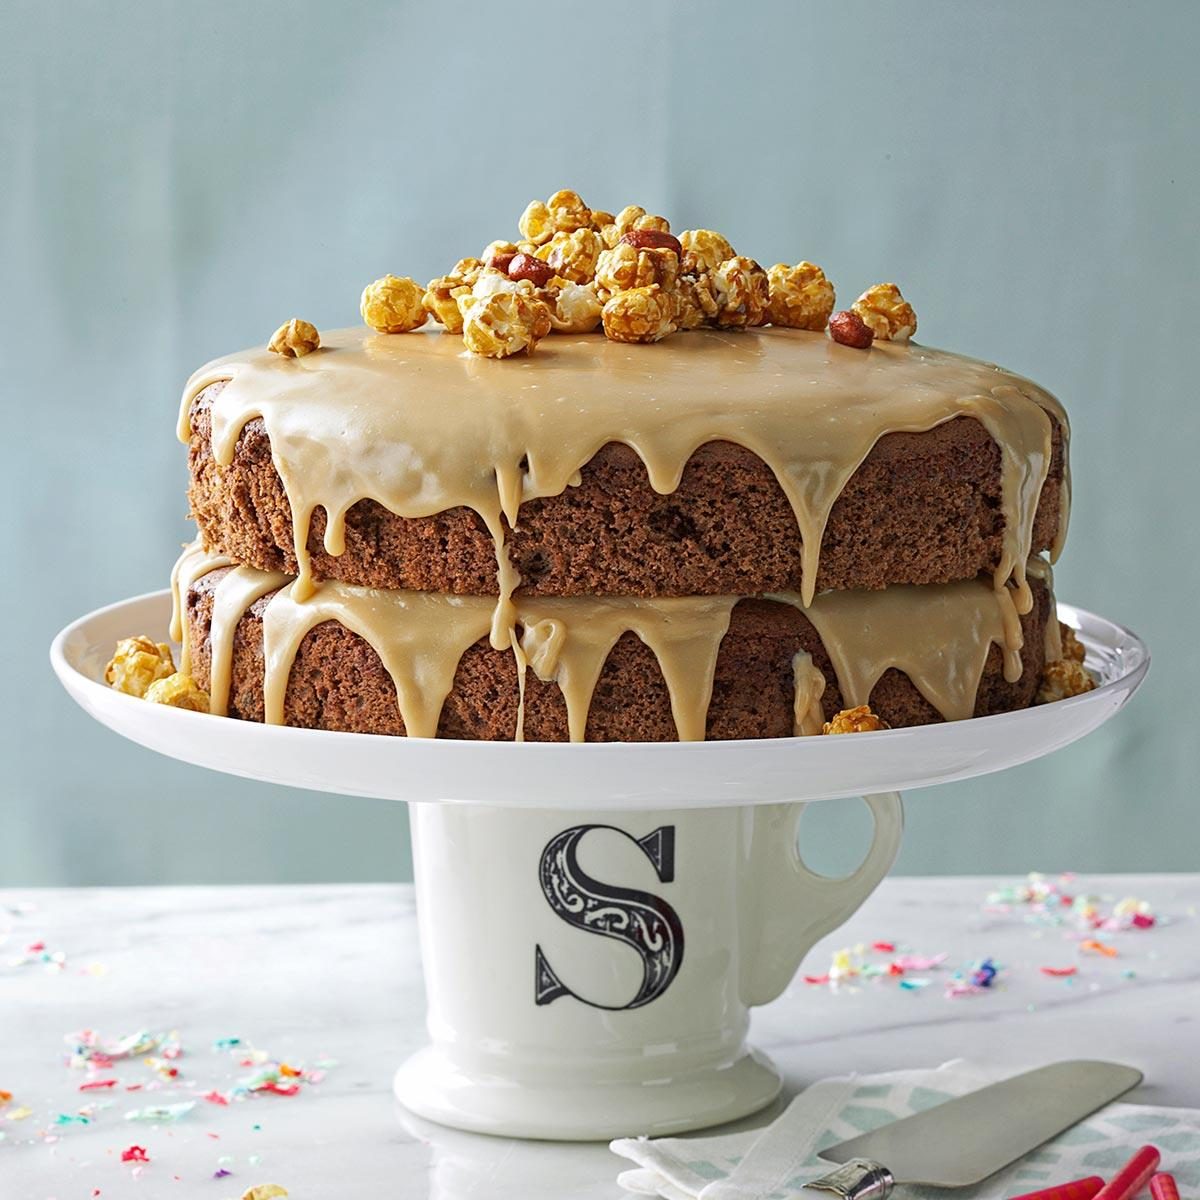 Chocolate Spice Cake With Caramel Icing Recipe How To Make It